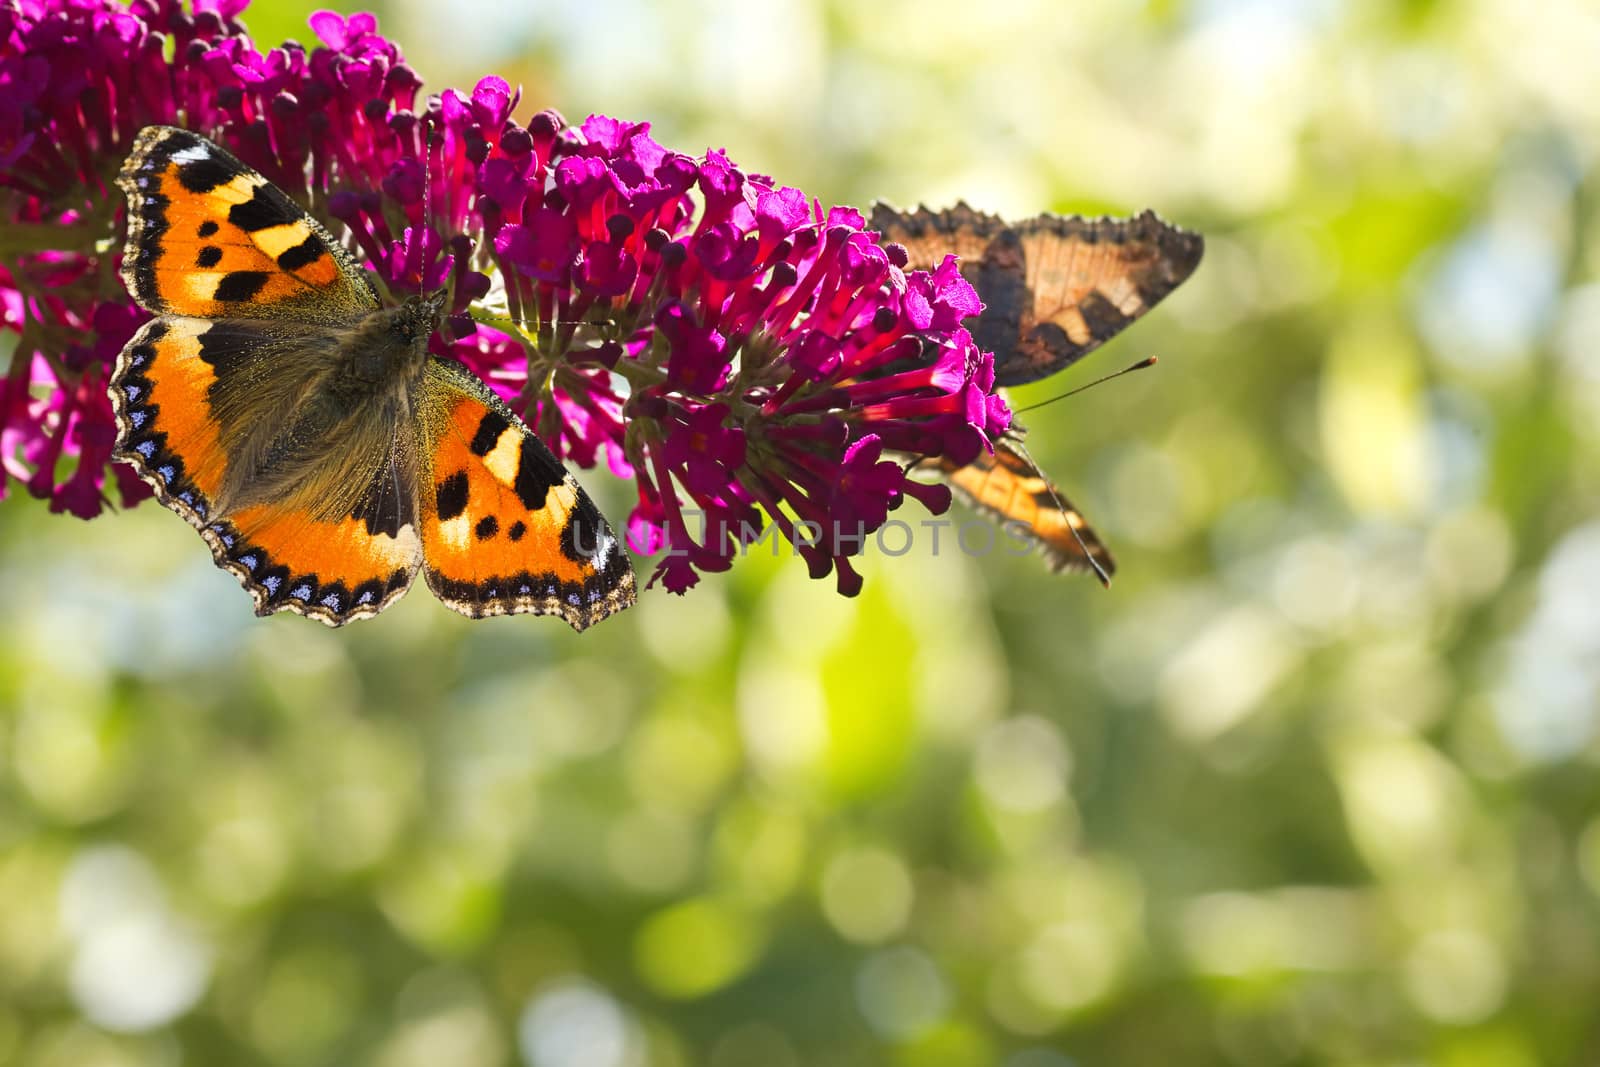 Two Small tottoiseshell butterflies on Butterfly bush in the garden in summer with bokeh background and copyspace